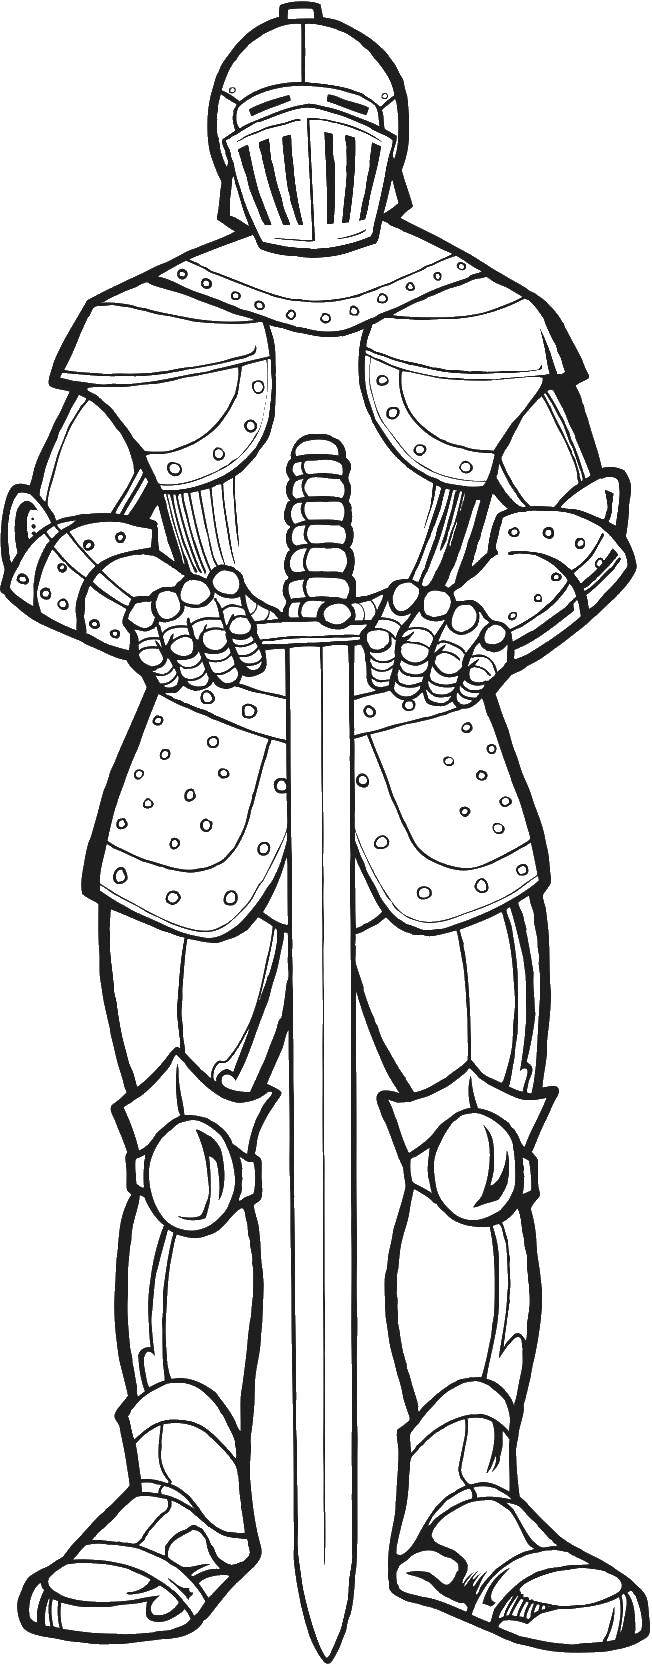 Coloring A knight in armor. Category Knights . Tags:  knights, armor, sword.